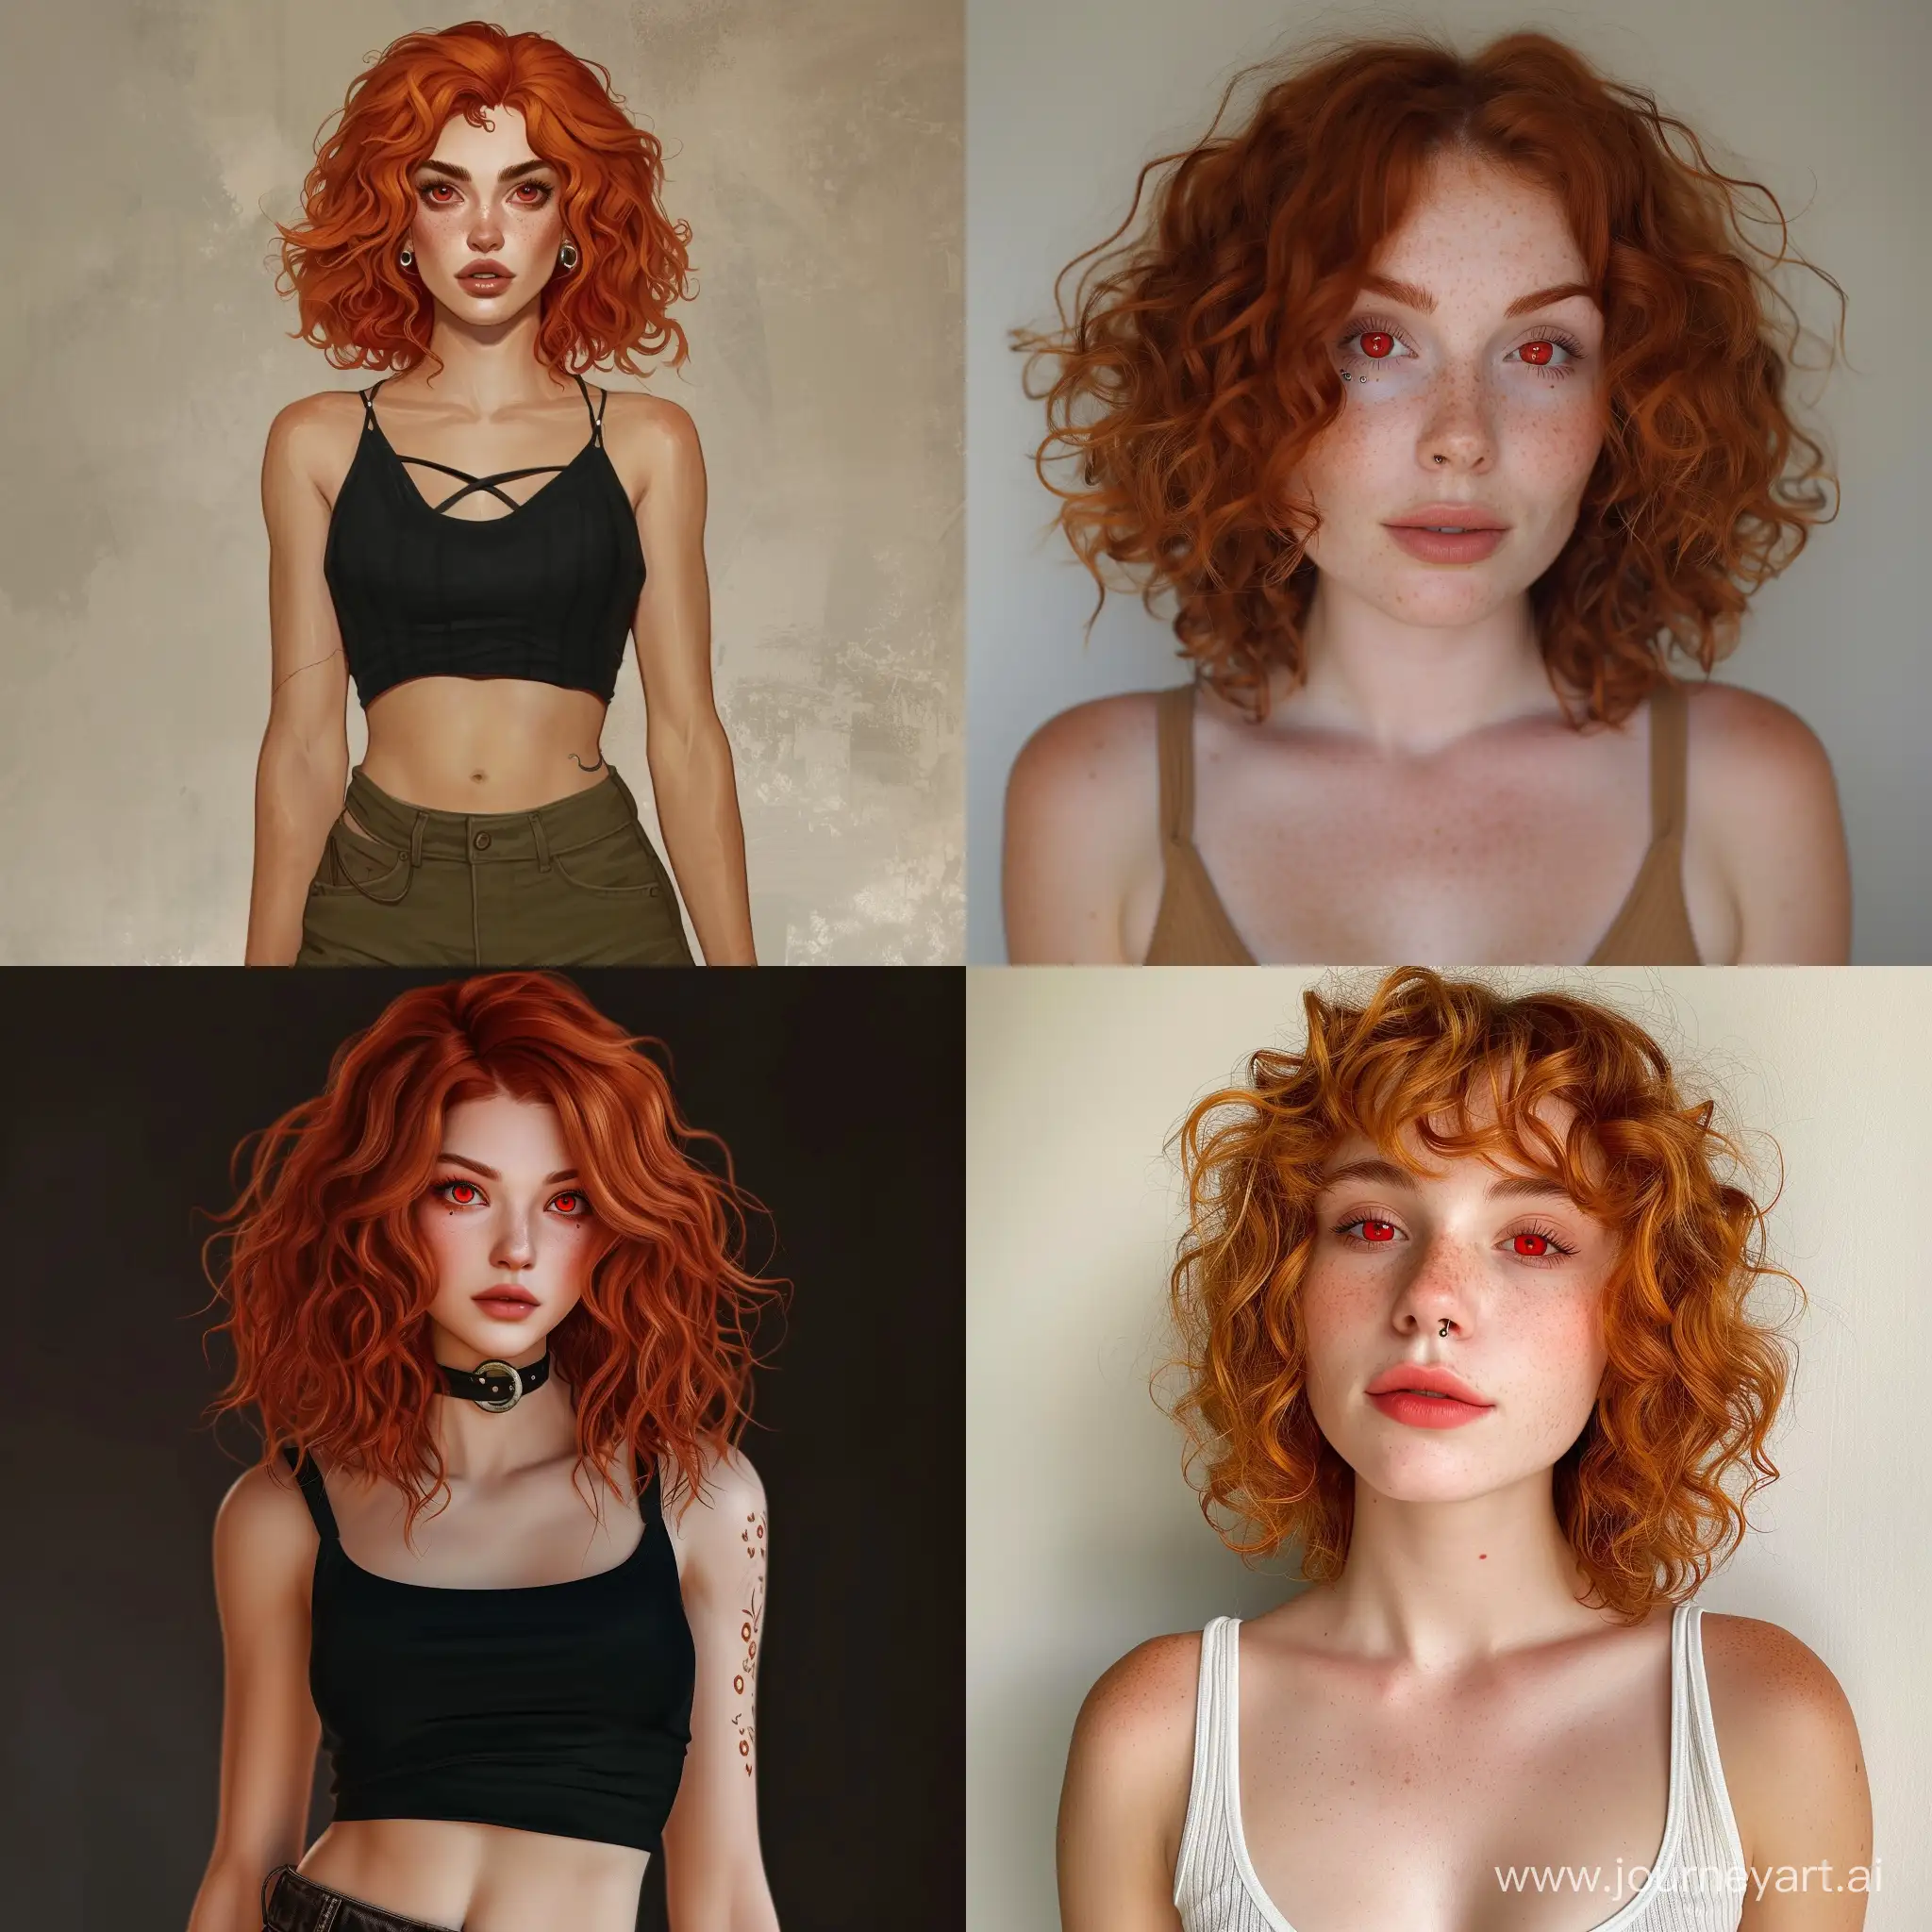 Vibrant-CurlyHaired-Character-with-Piercing-Eyes-and-Tanned-Skin